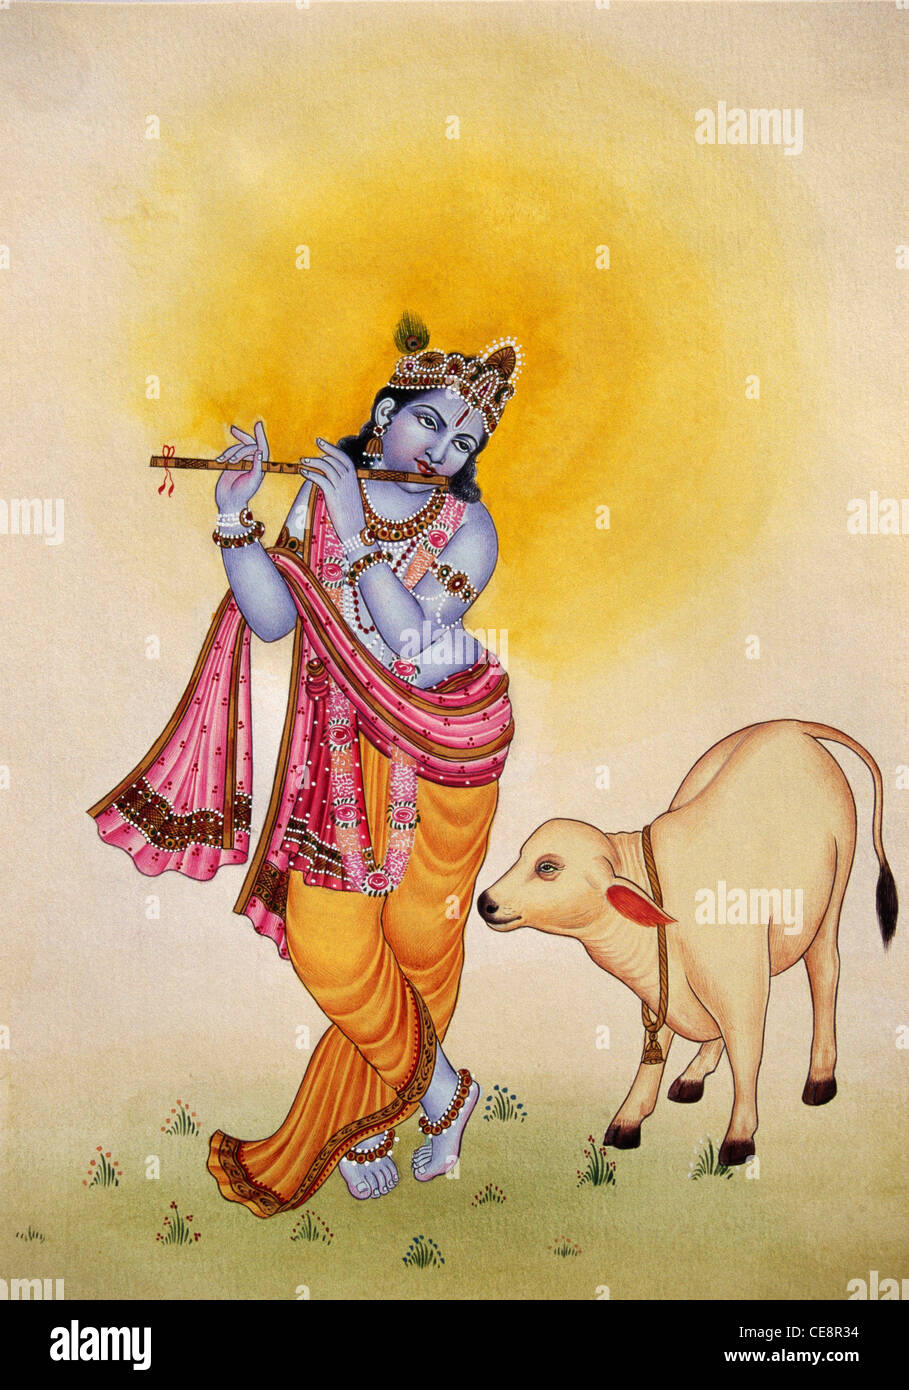 Lord Krishna playing musical instrument flute to cow   Miniature Painting on paper Stock Photo